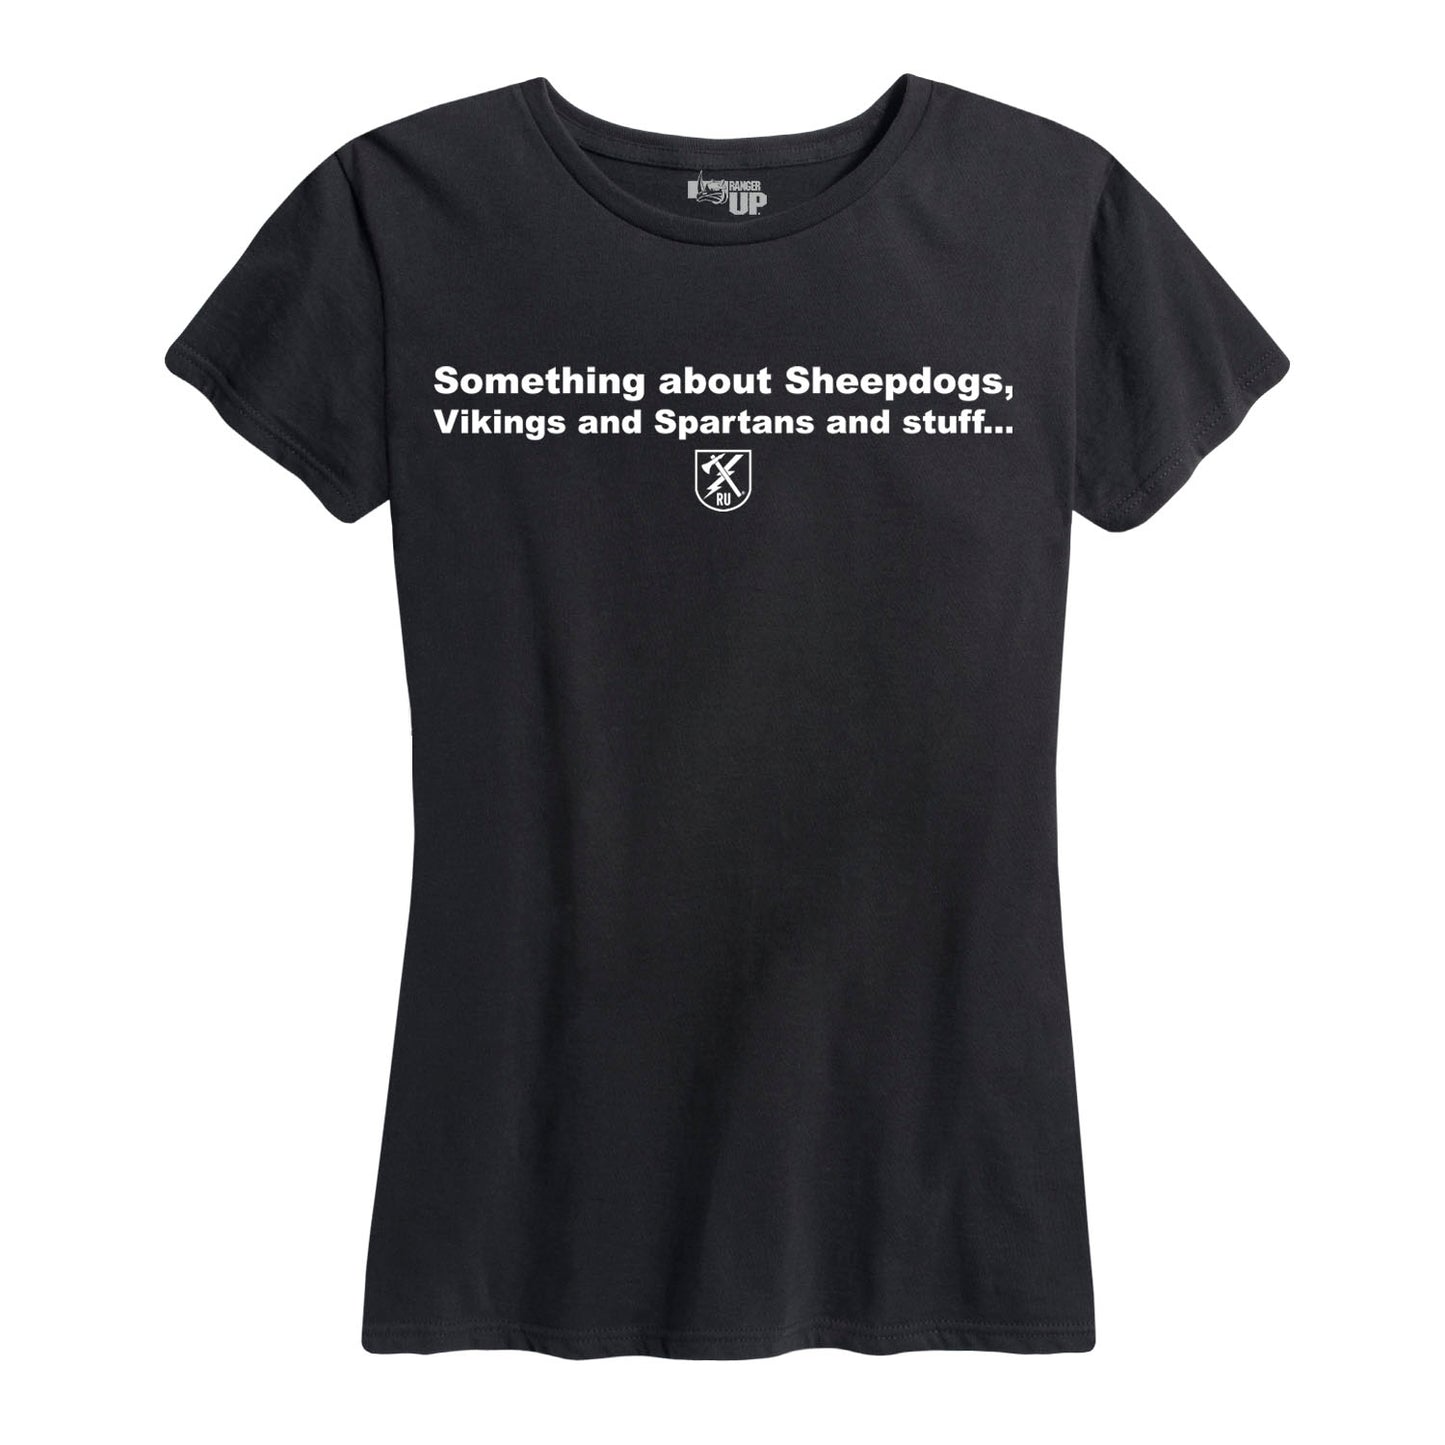 Women's Something About Sheepdogs Tee